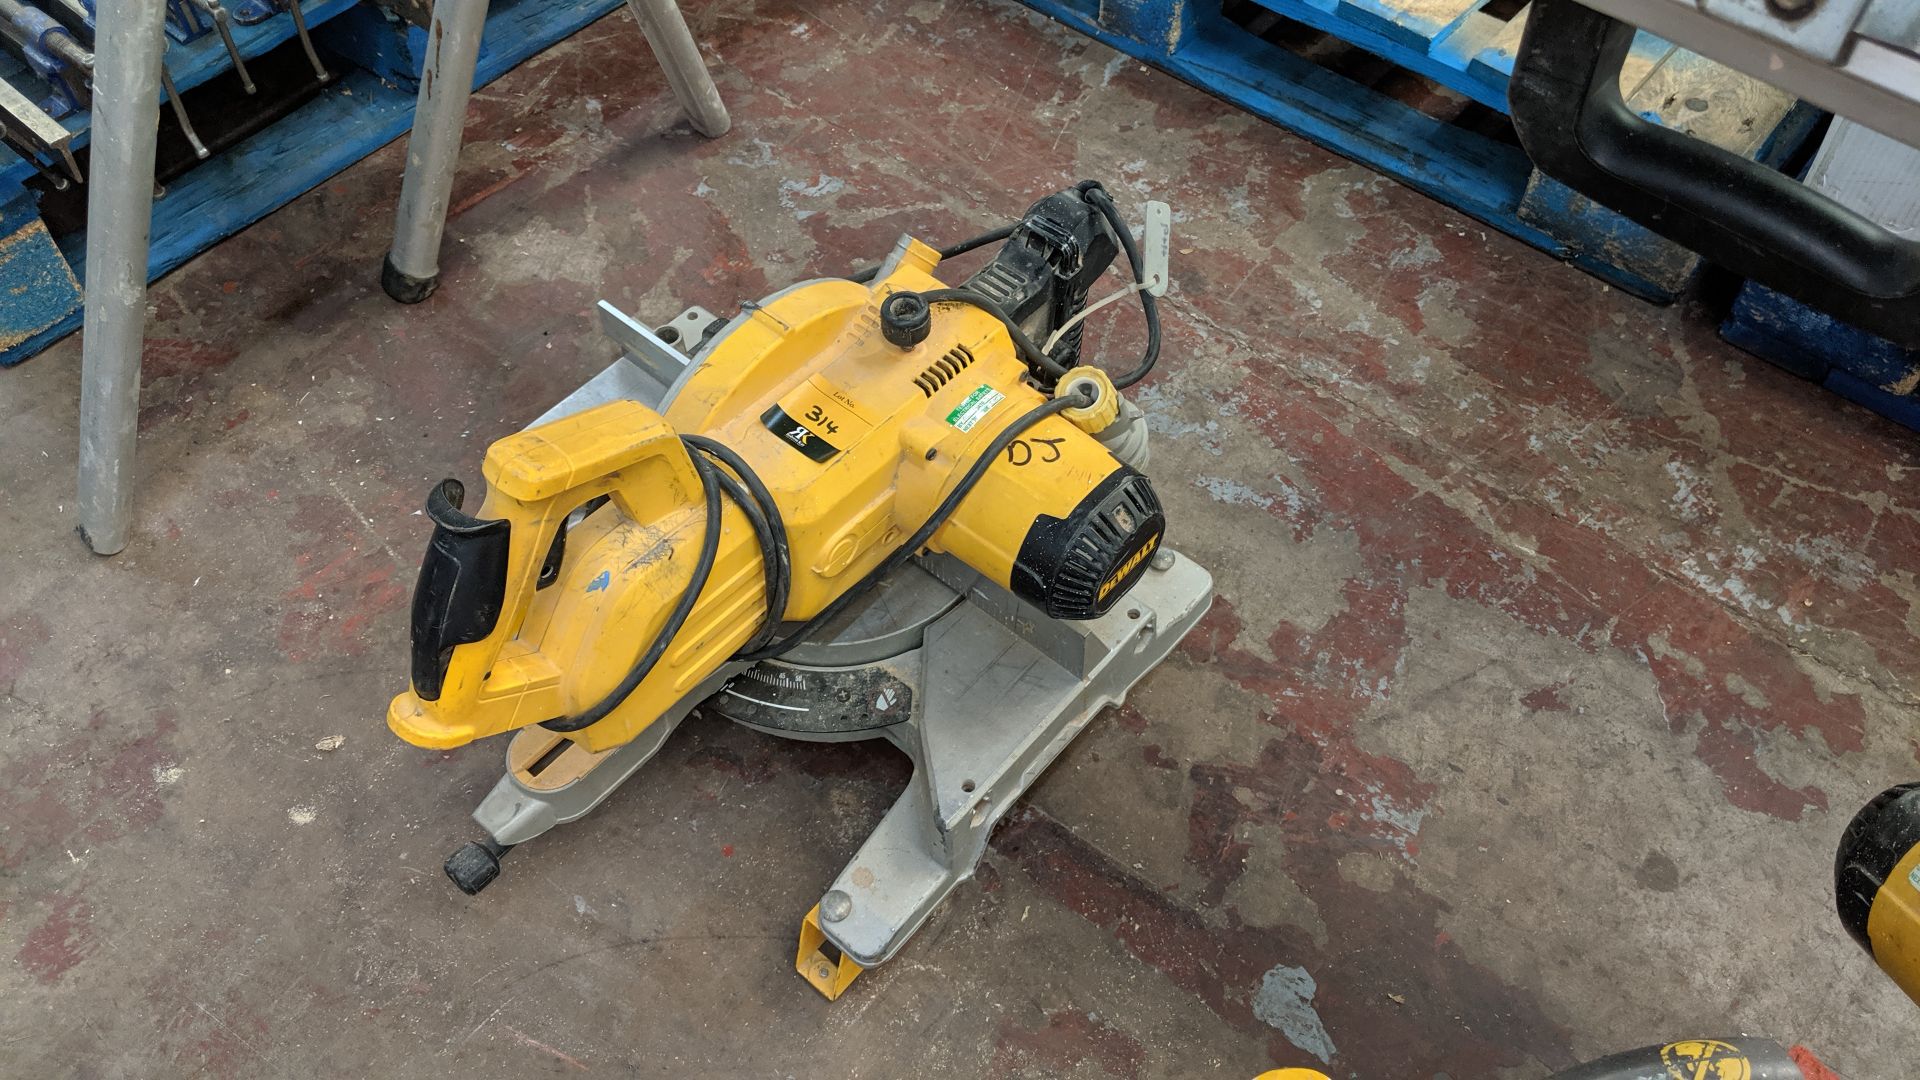 DeWalt 110V DW777-LX mitre saw IMPORTANT: Please remember goods successfully bid upon must be paid - Image 2 of 4